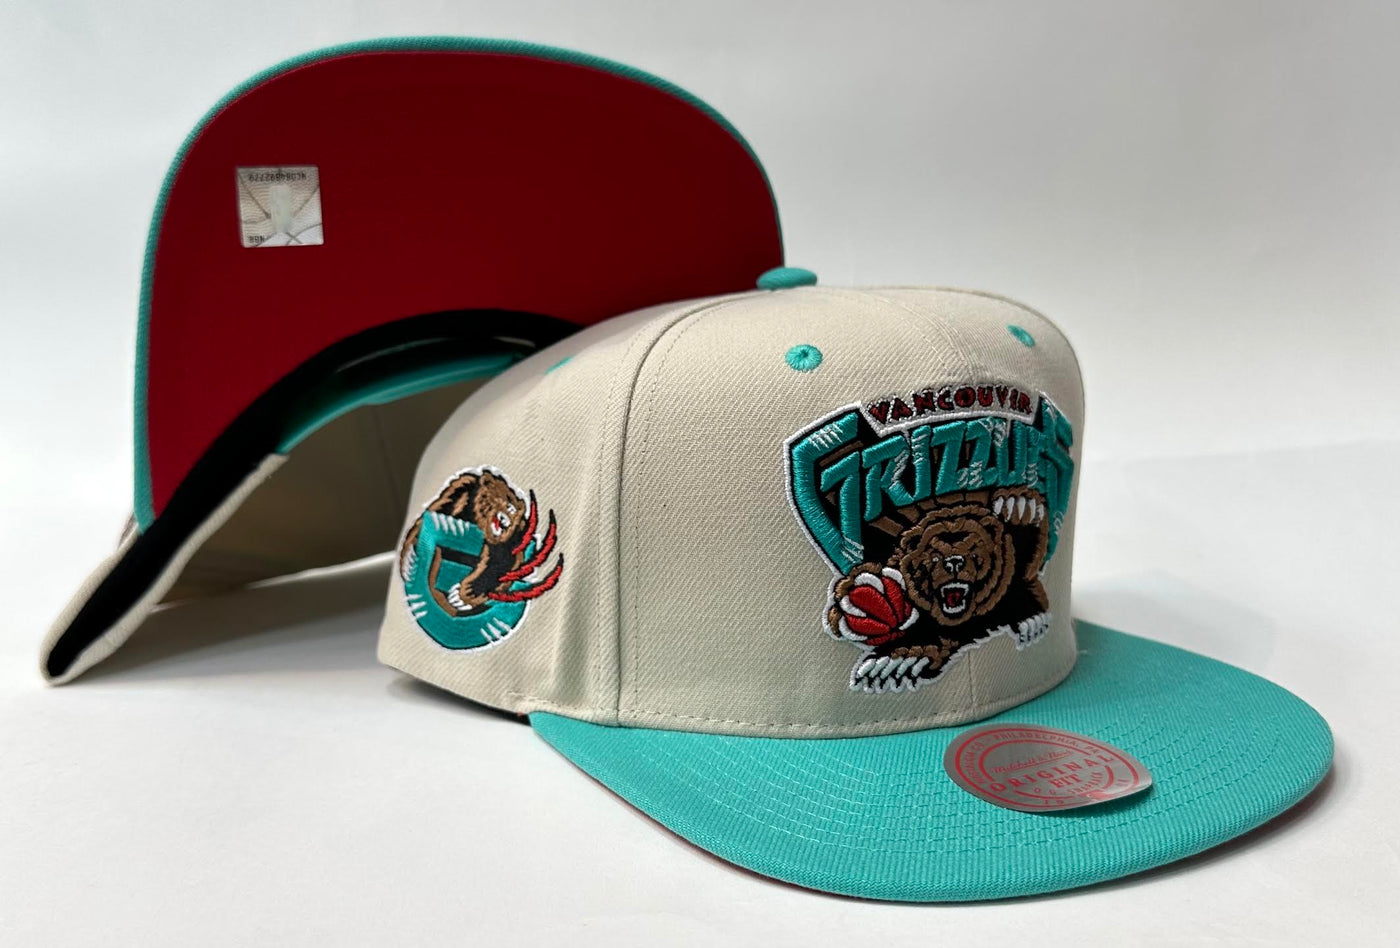 Vancouver Grizzlies Mitchell & Ness NBA SnapBack Hat